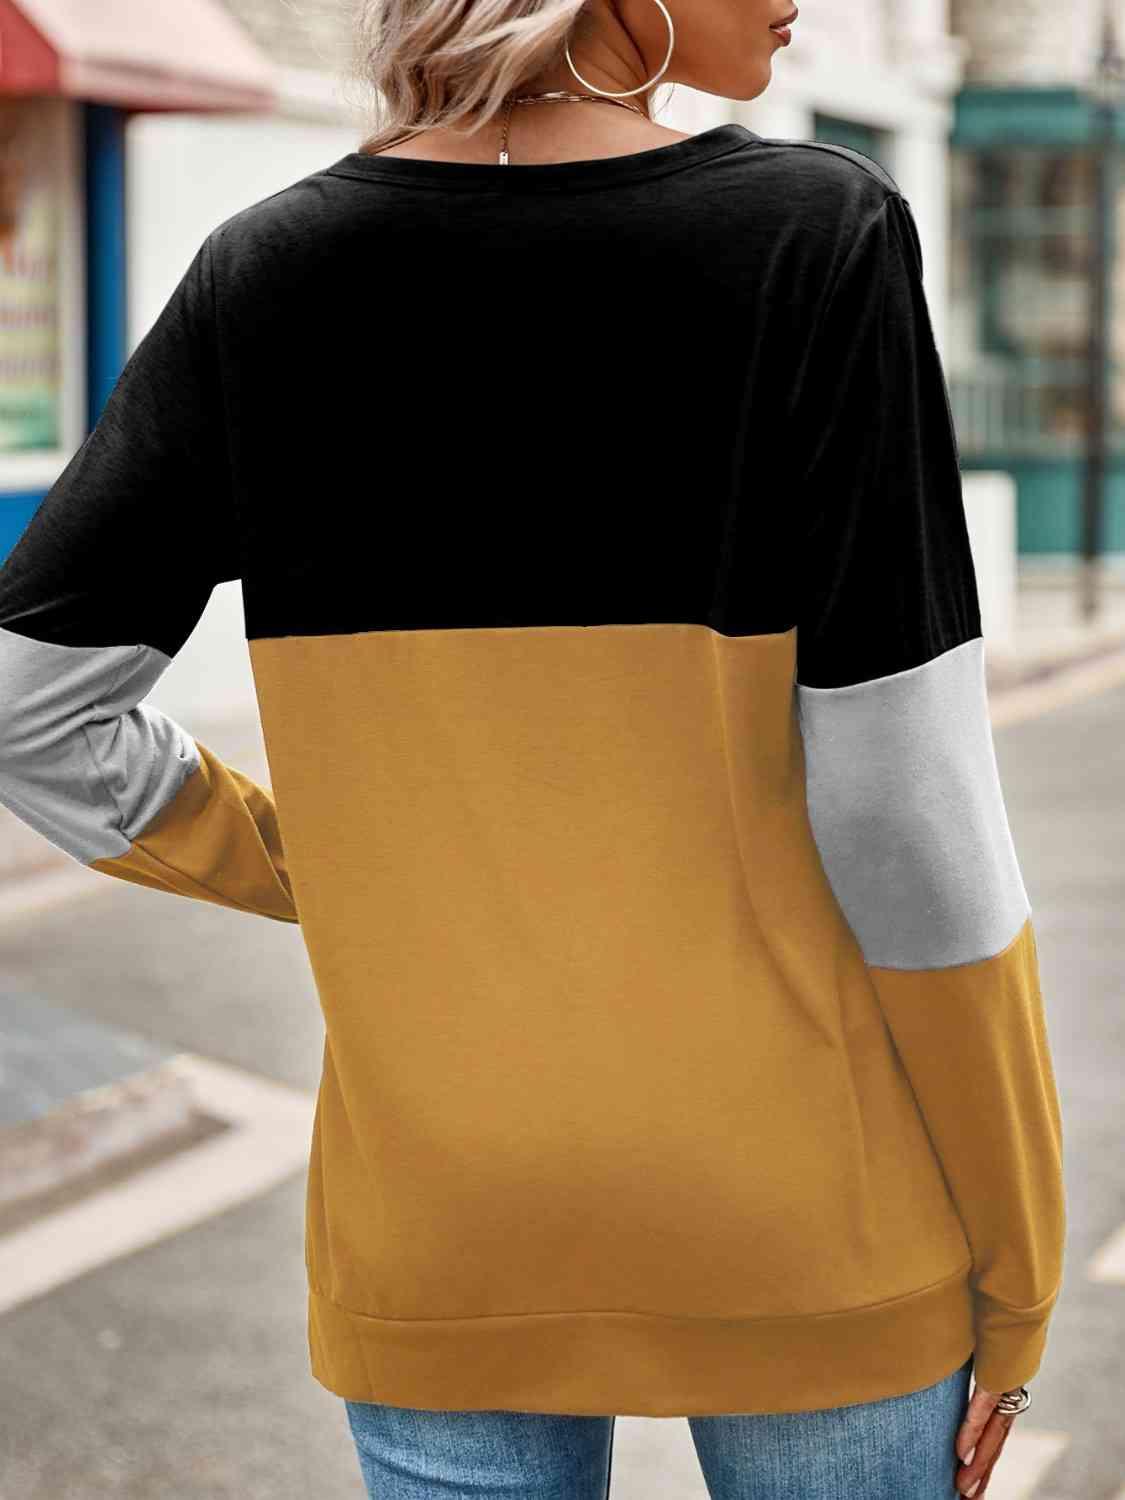 a woman wearing a black, yellow and grey top